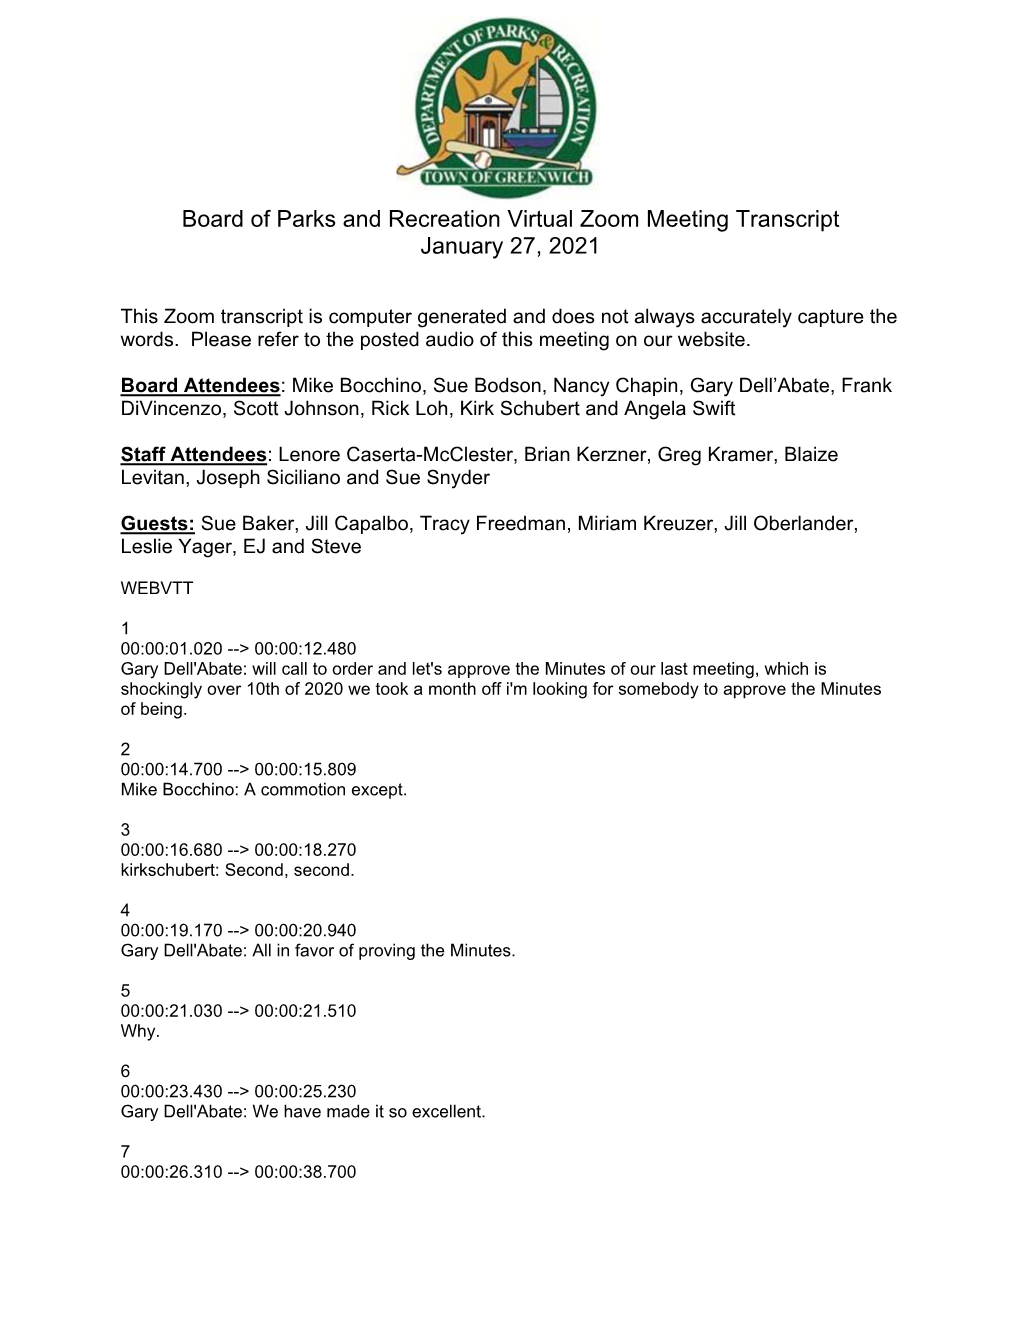 Board of Parks and Recreation Virtual Zoom Meeting Transcript January 27, 2021